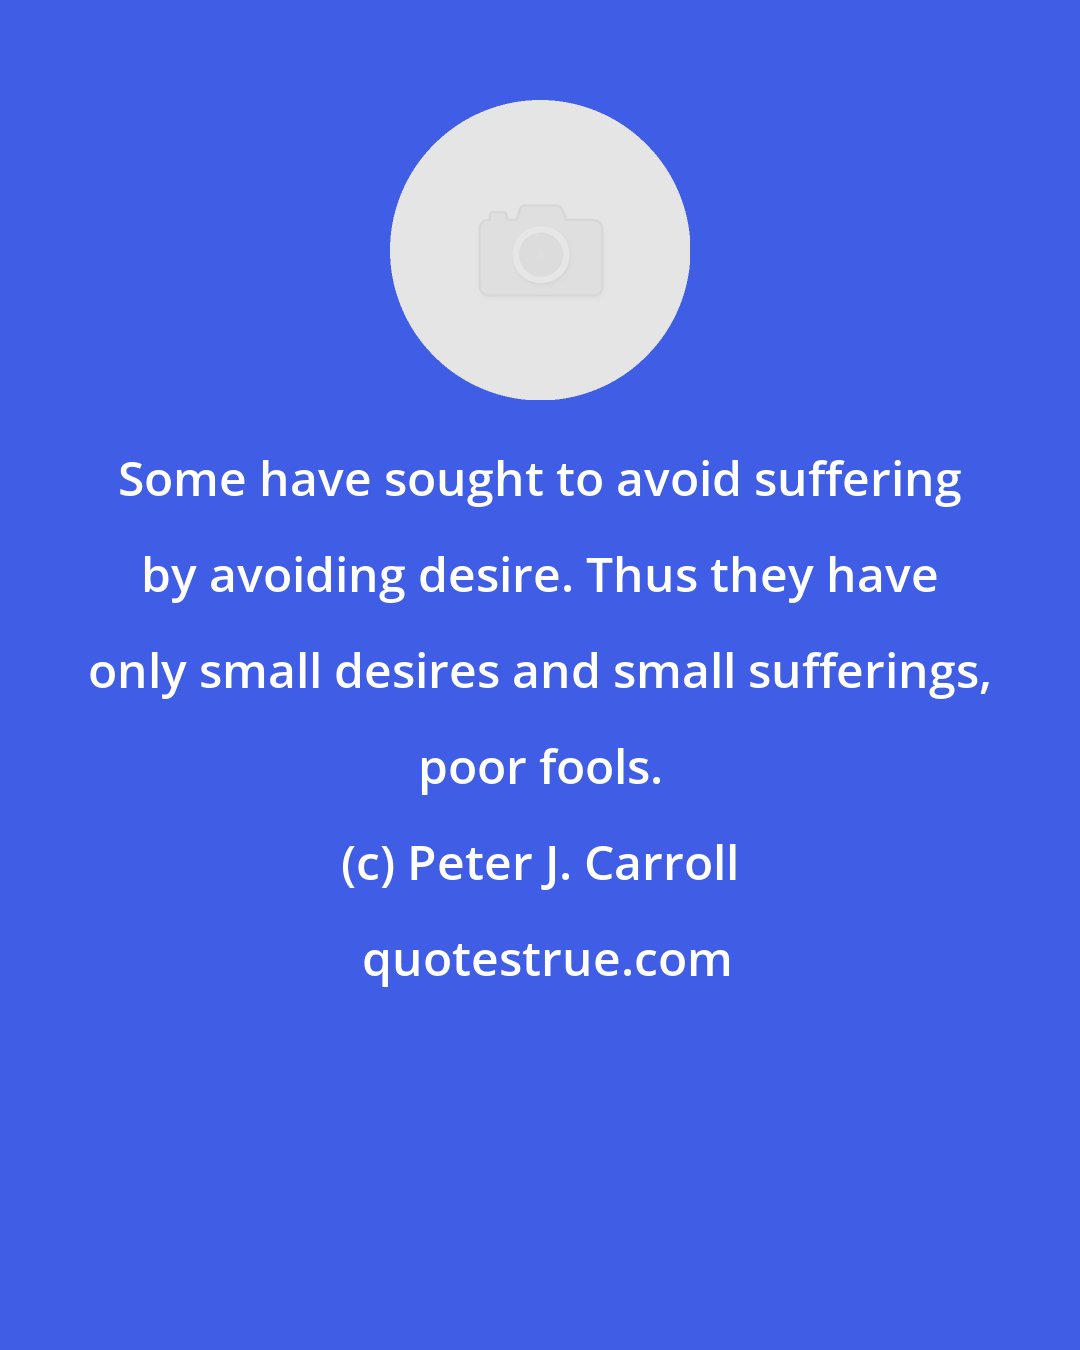 Peter J. Carroll: Some have sought to avoid suffering by avoiding desire. Thus they have only small desires and small sufferings, poor fools.